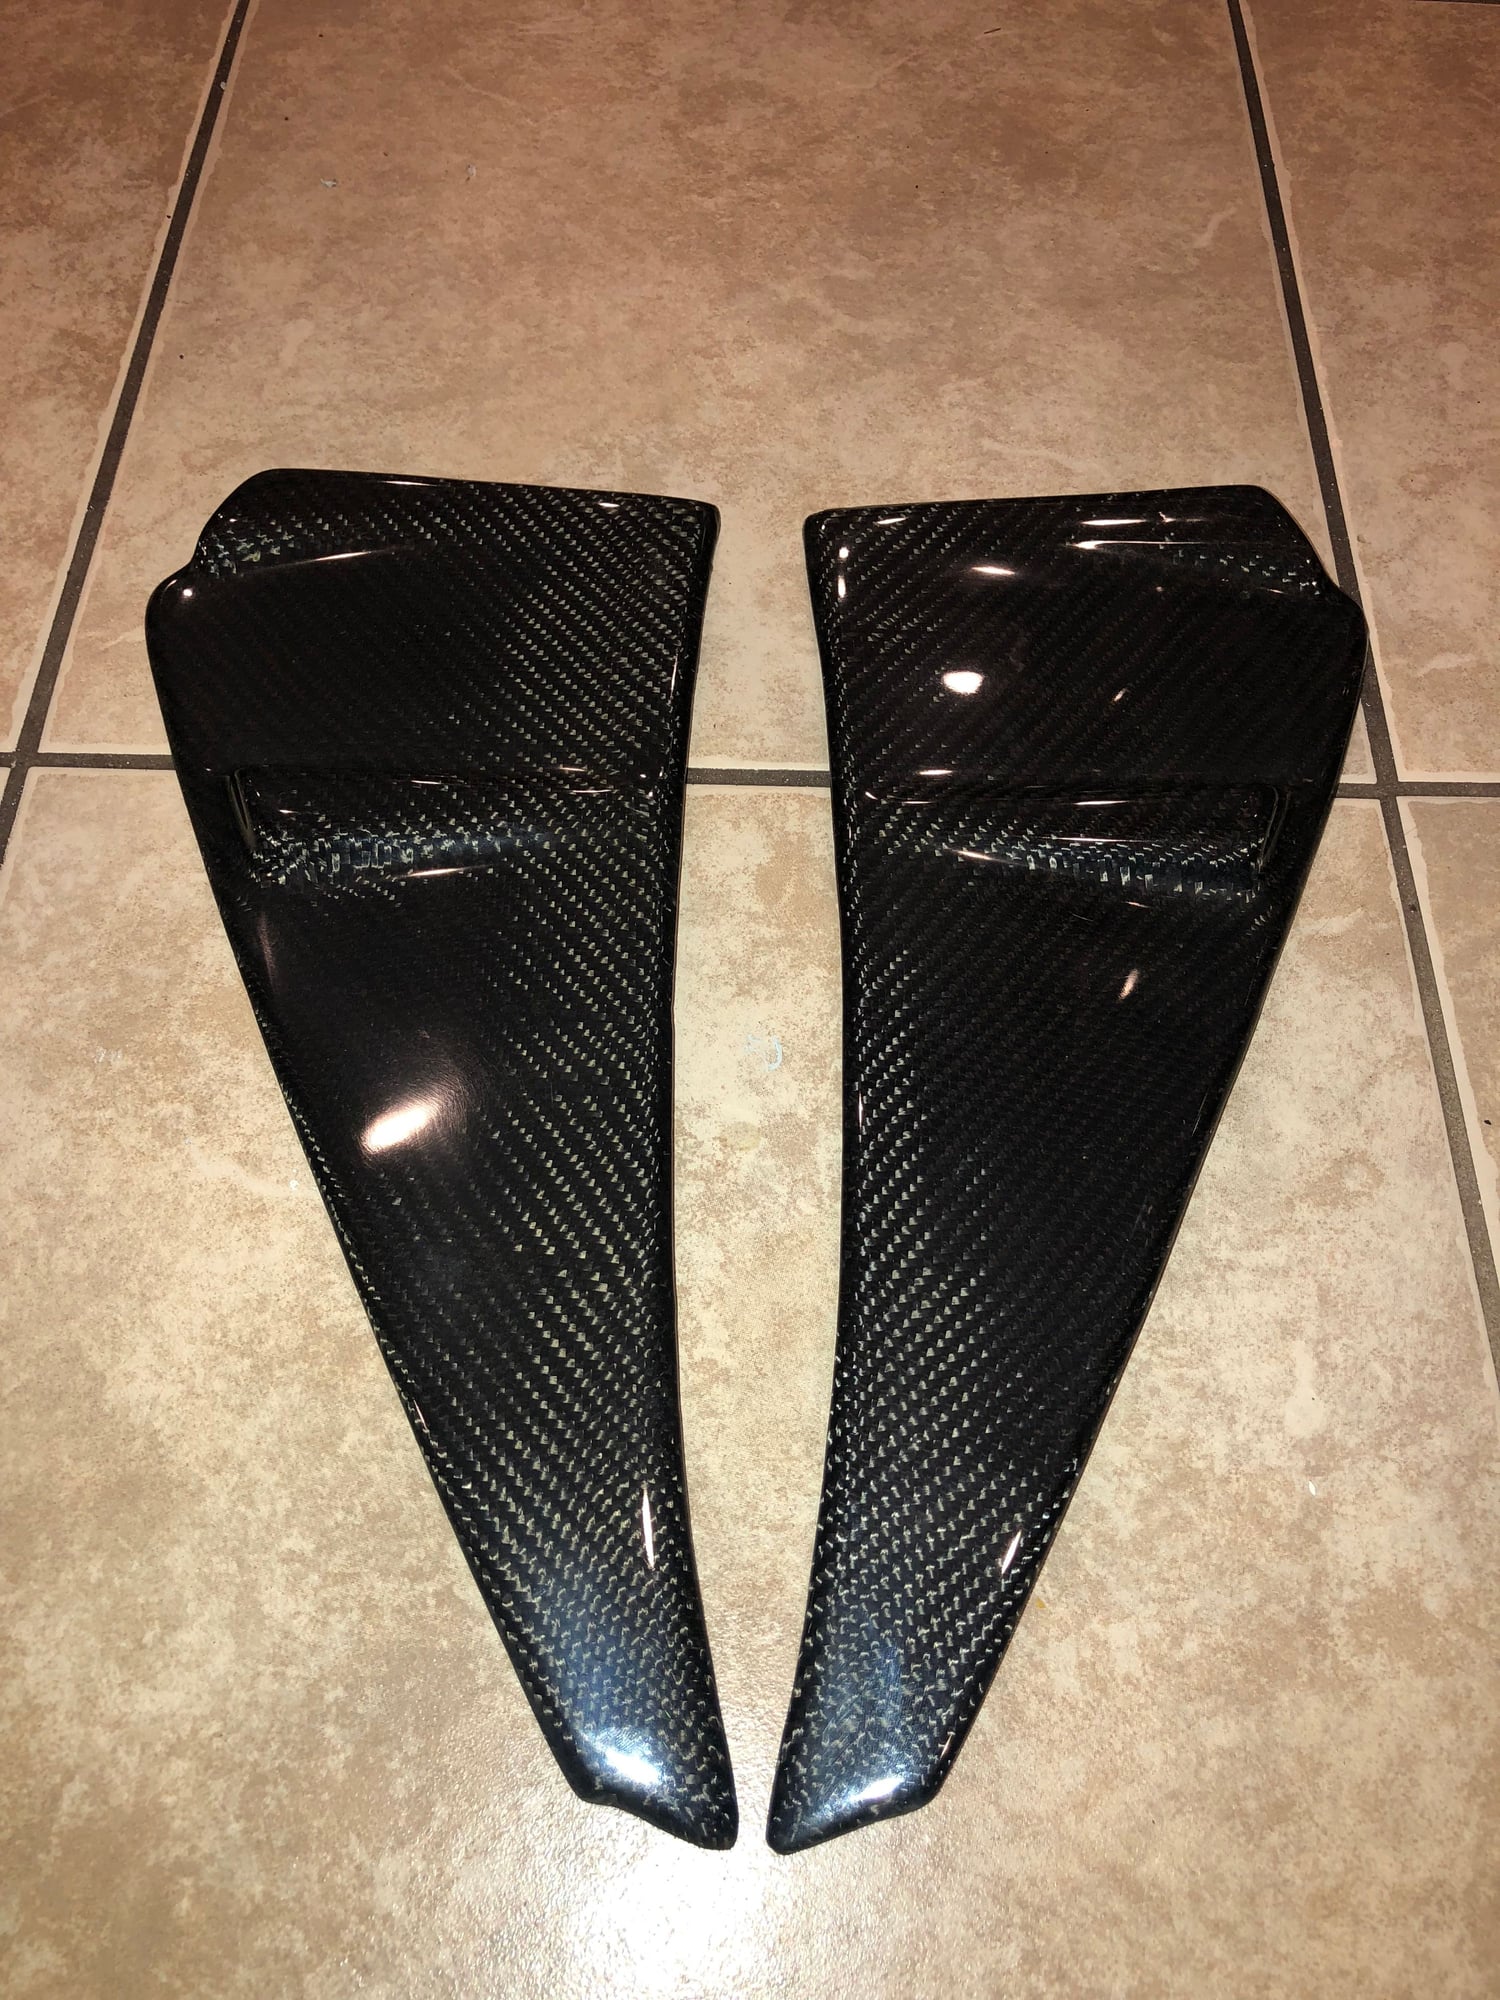 Accessories - Lexus ISF 08-14 CF fender ducts - Used - 2008 to 2014 Lexus IS F - Portland, OR 97222, United States